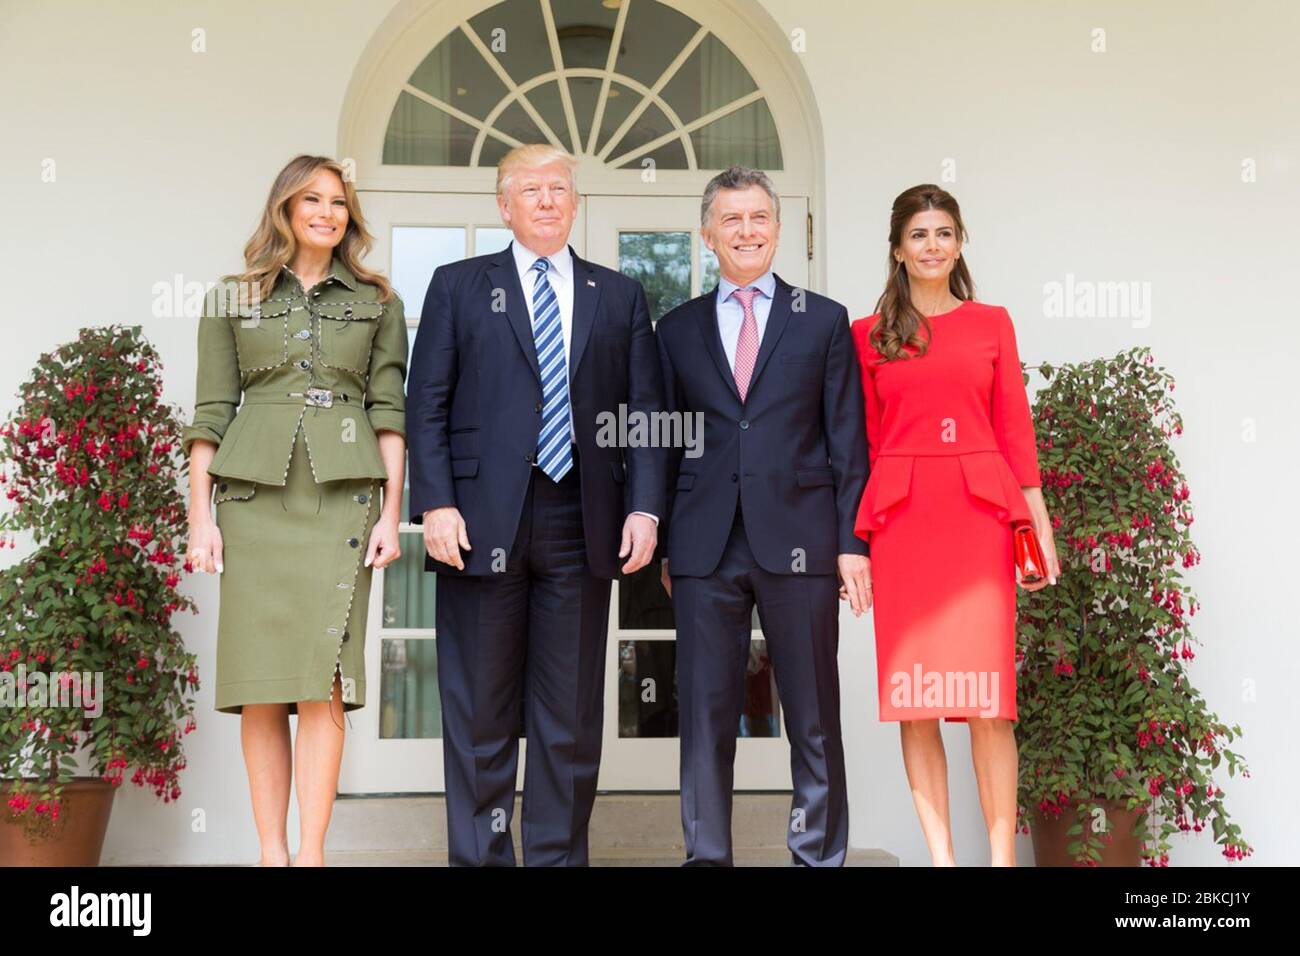 President Donald Trump and First Lady Melania Trump pose for photos with Argentine President Mauricio Macri and his wife, Mrs. Juliana Awada, in the Rose Garden, Thursday, April 27, 2017. President Trump's First 100 Days: 100 Stock Photo